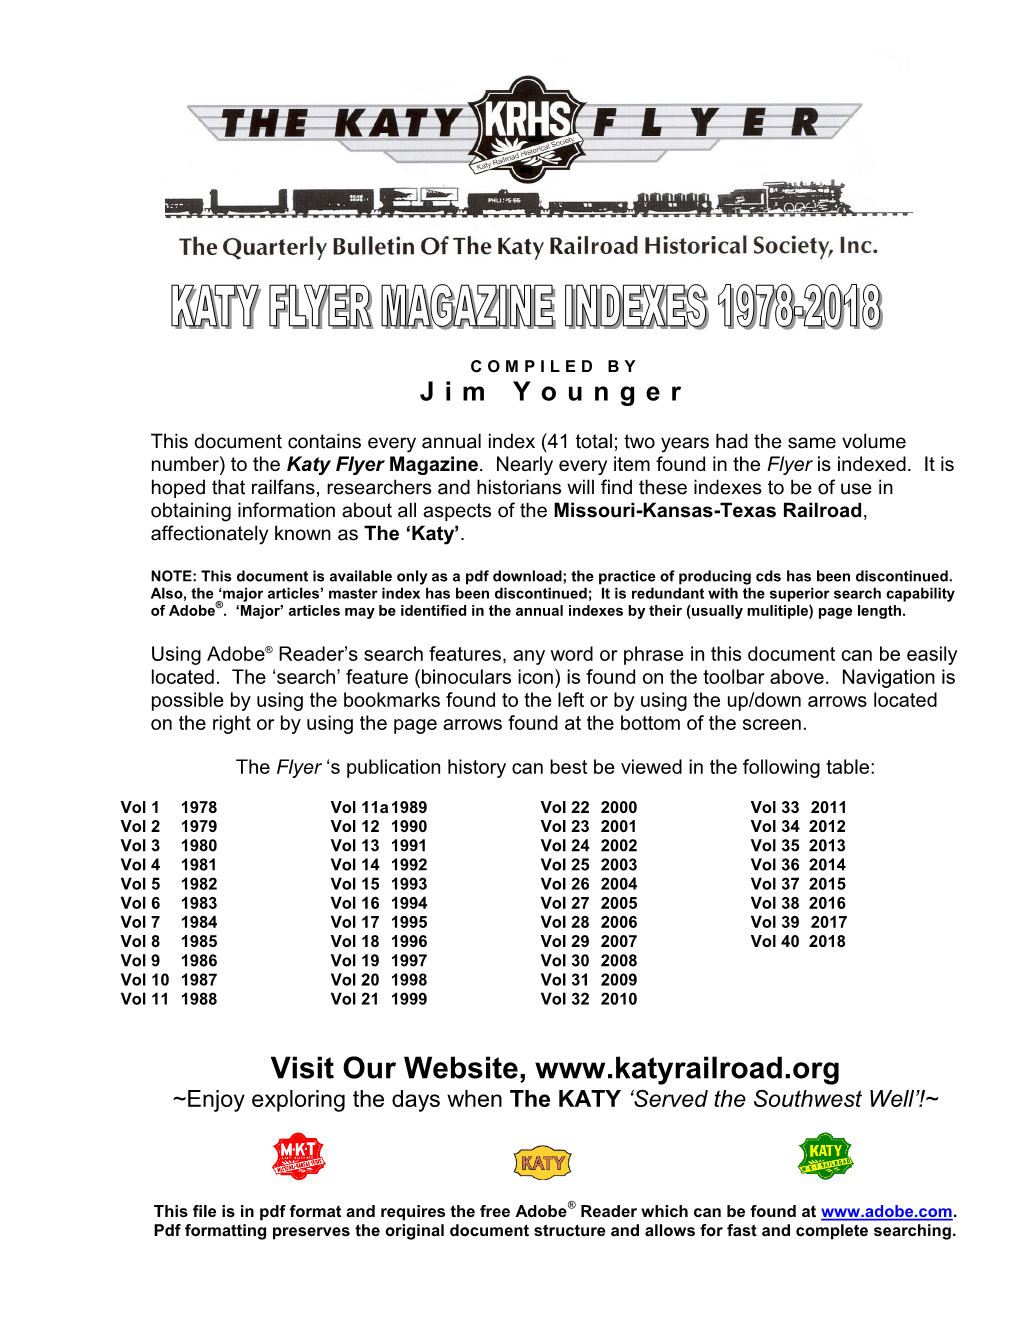 Visit Our Website, ~Enjoy Exploring the Days When the KATY ‘Served the Southwest Well’!~